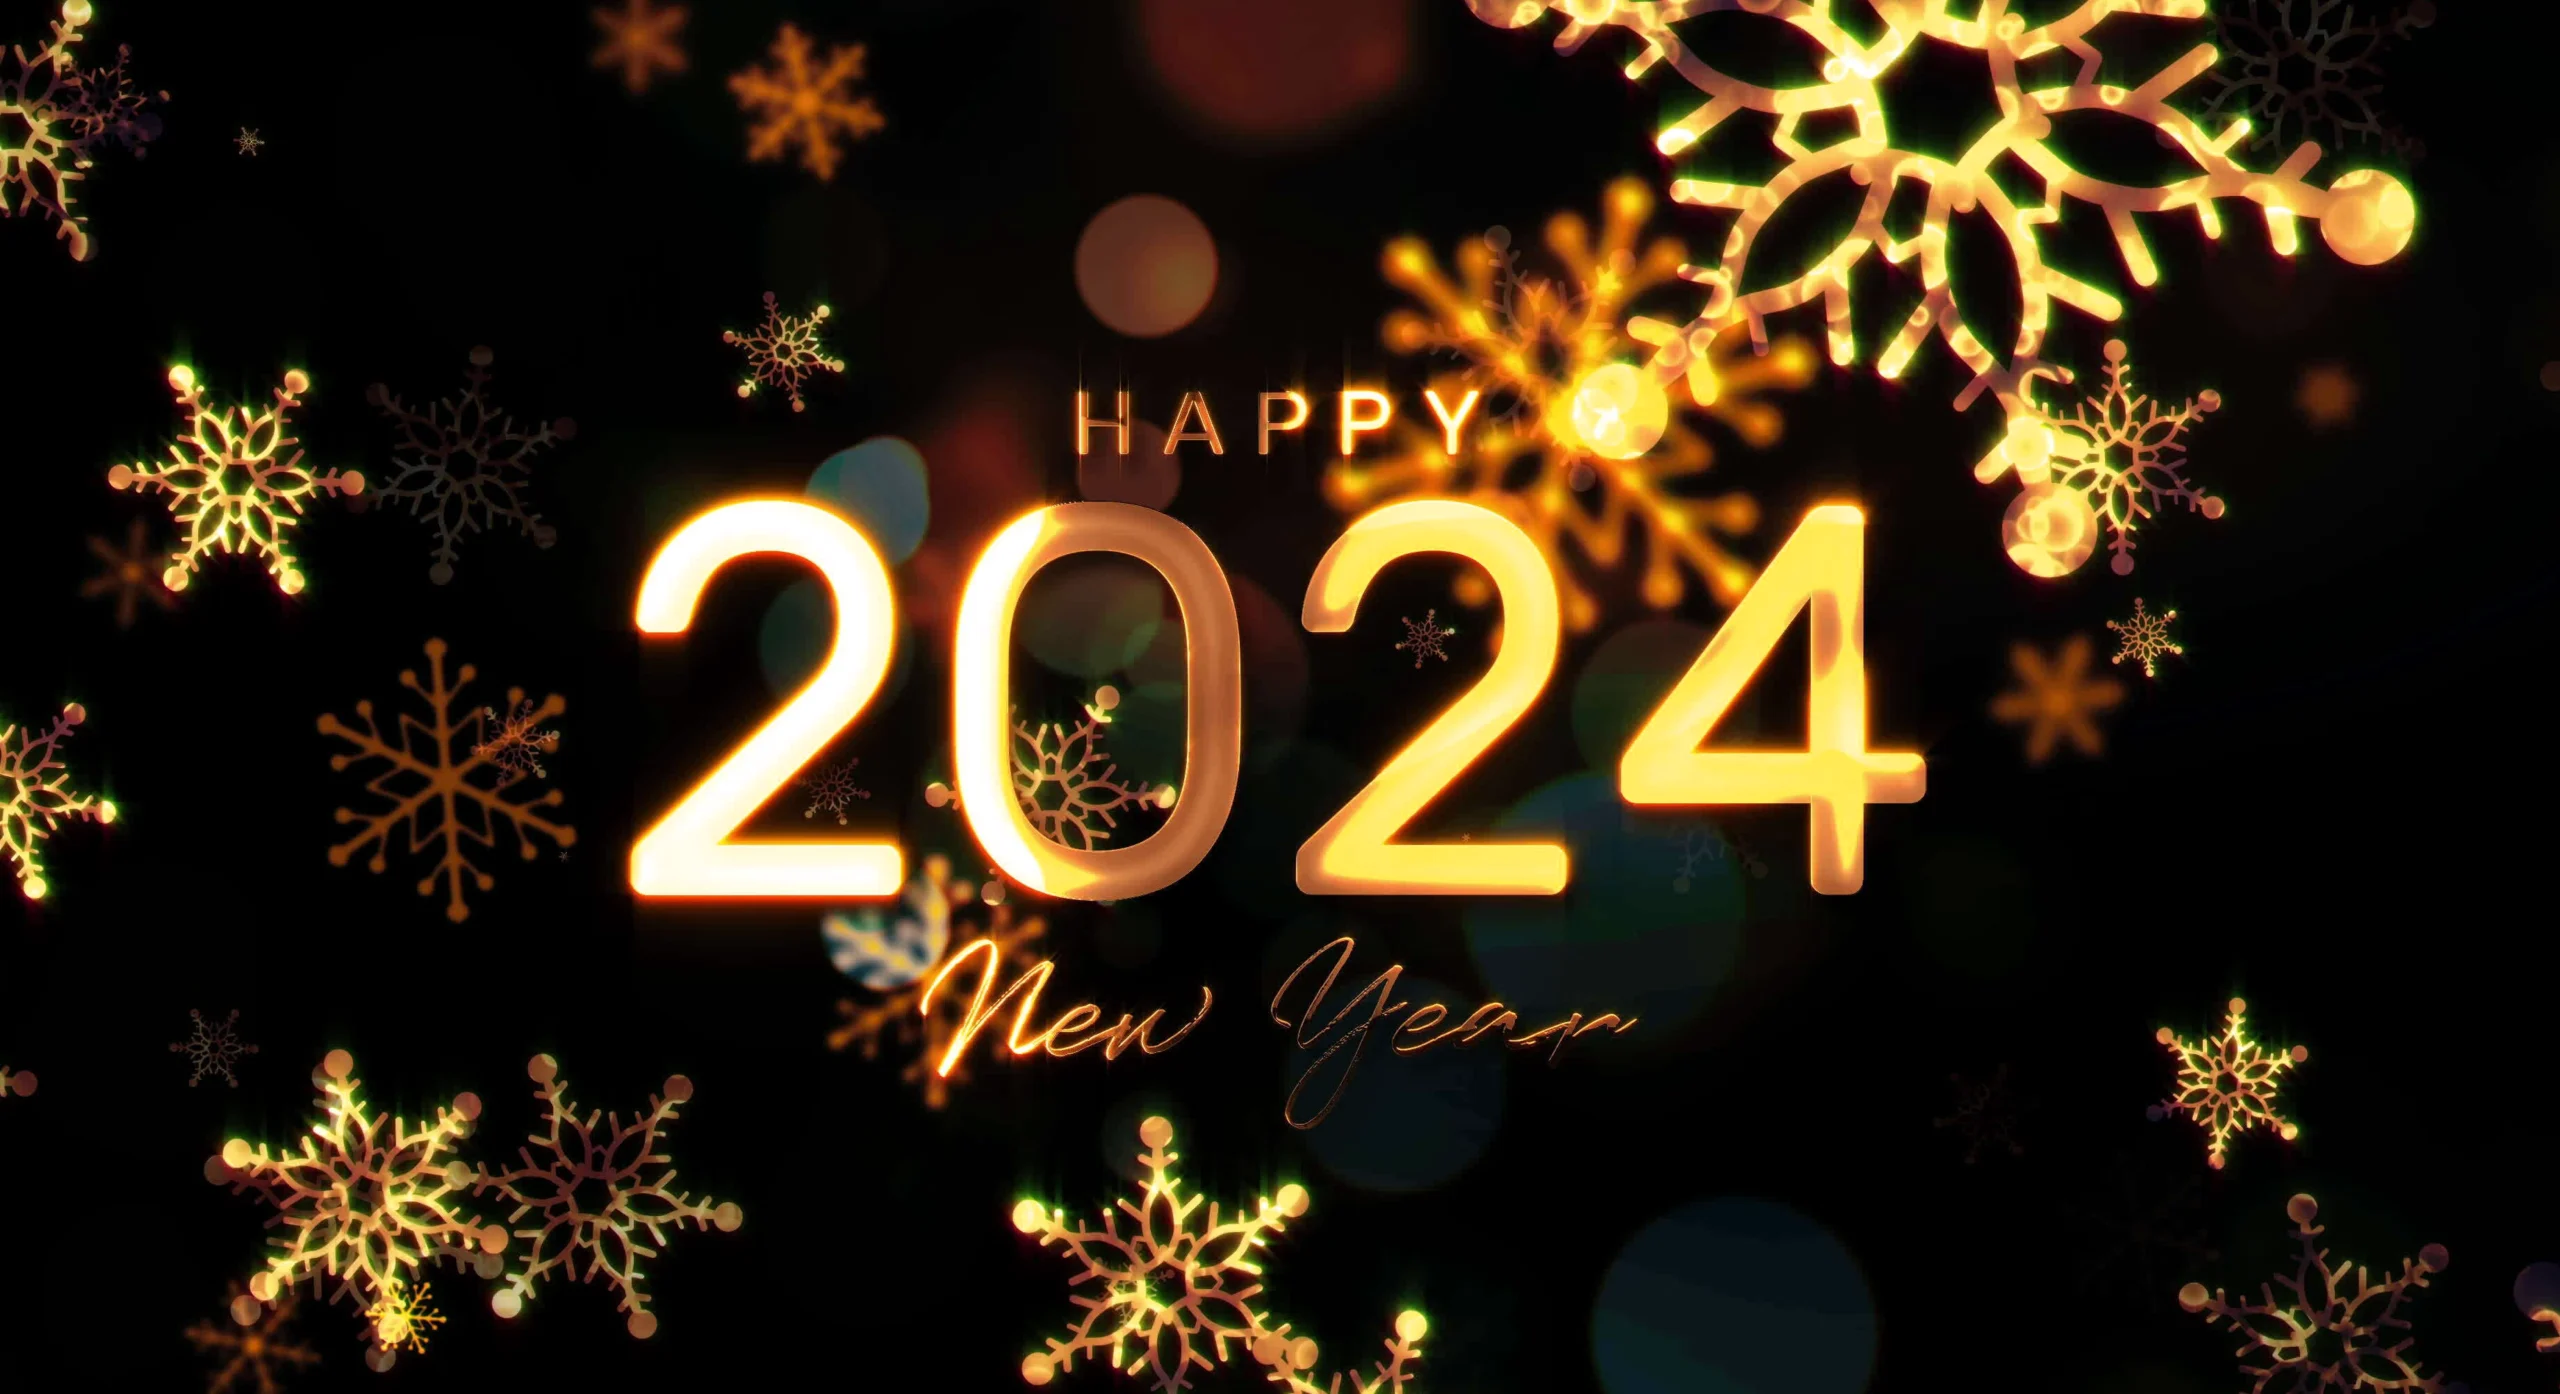 2024 Happy New Year Gold Text With Glow Snowflakes